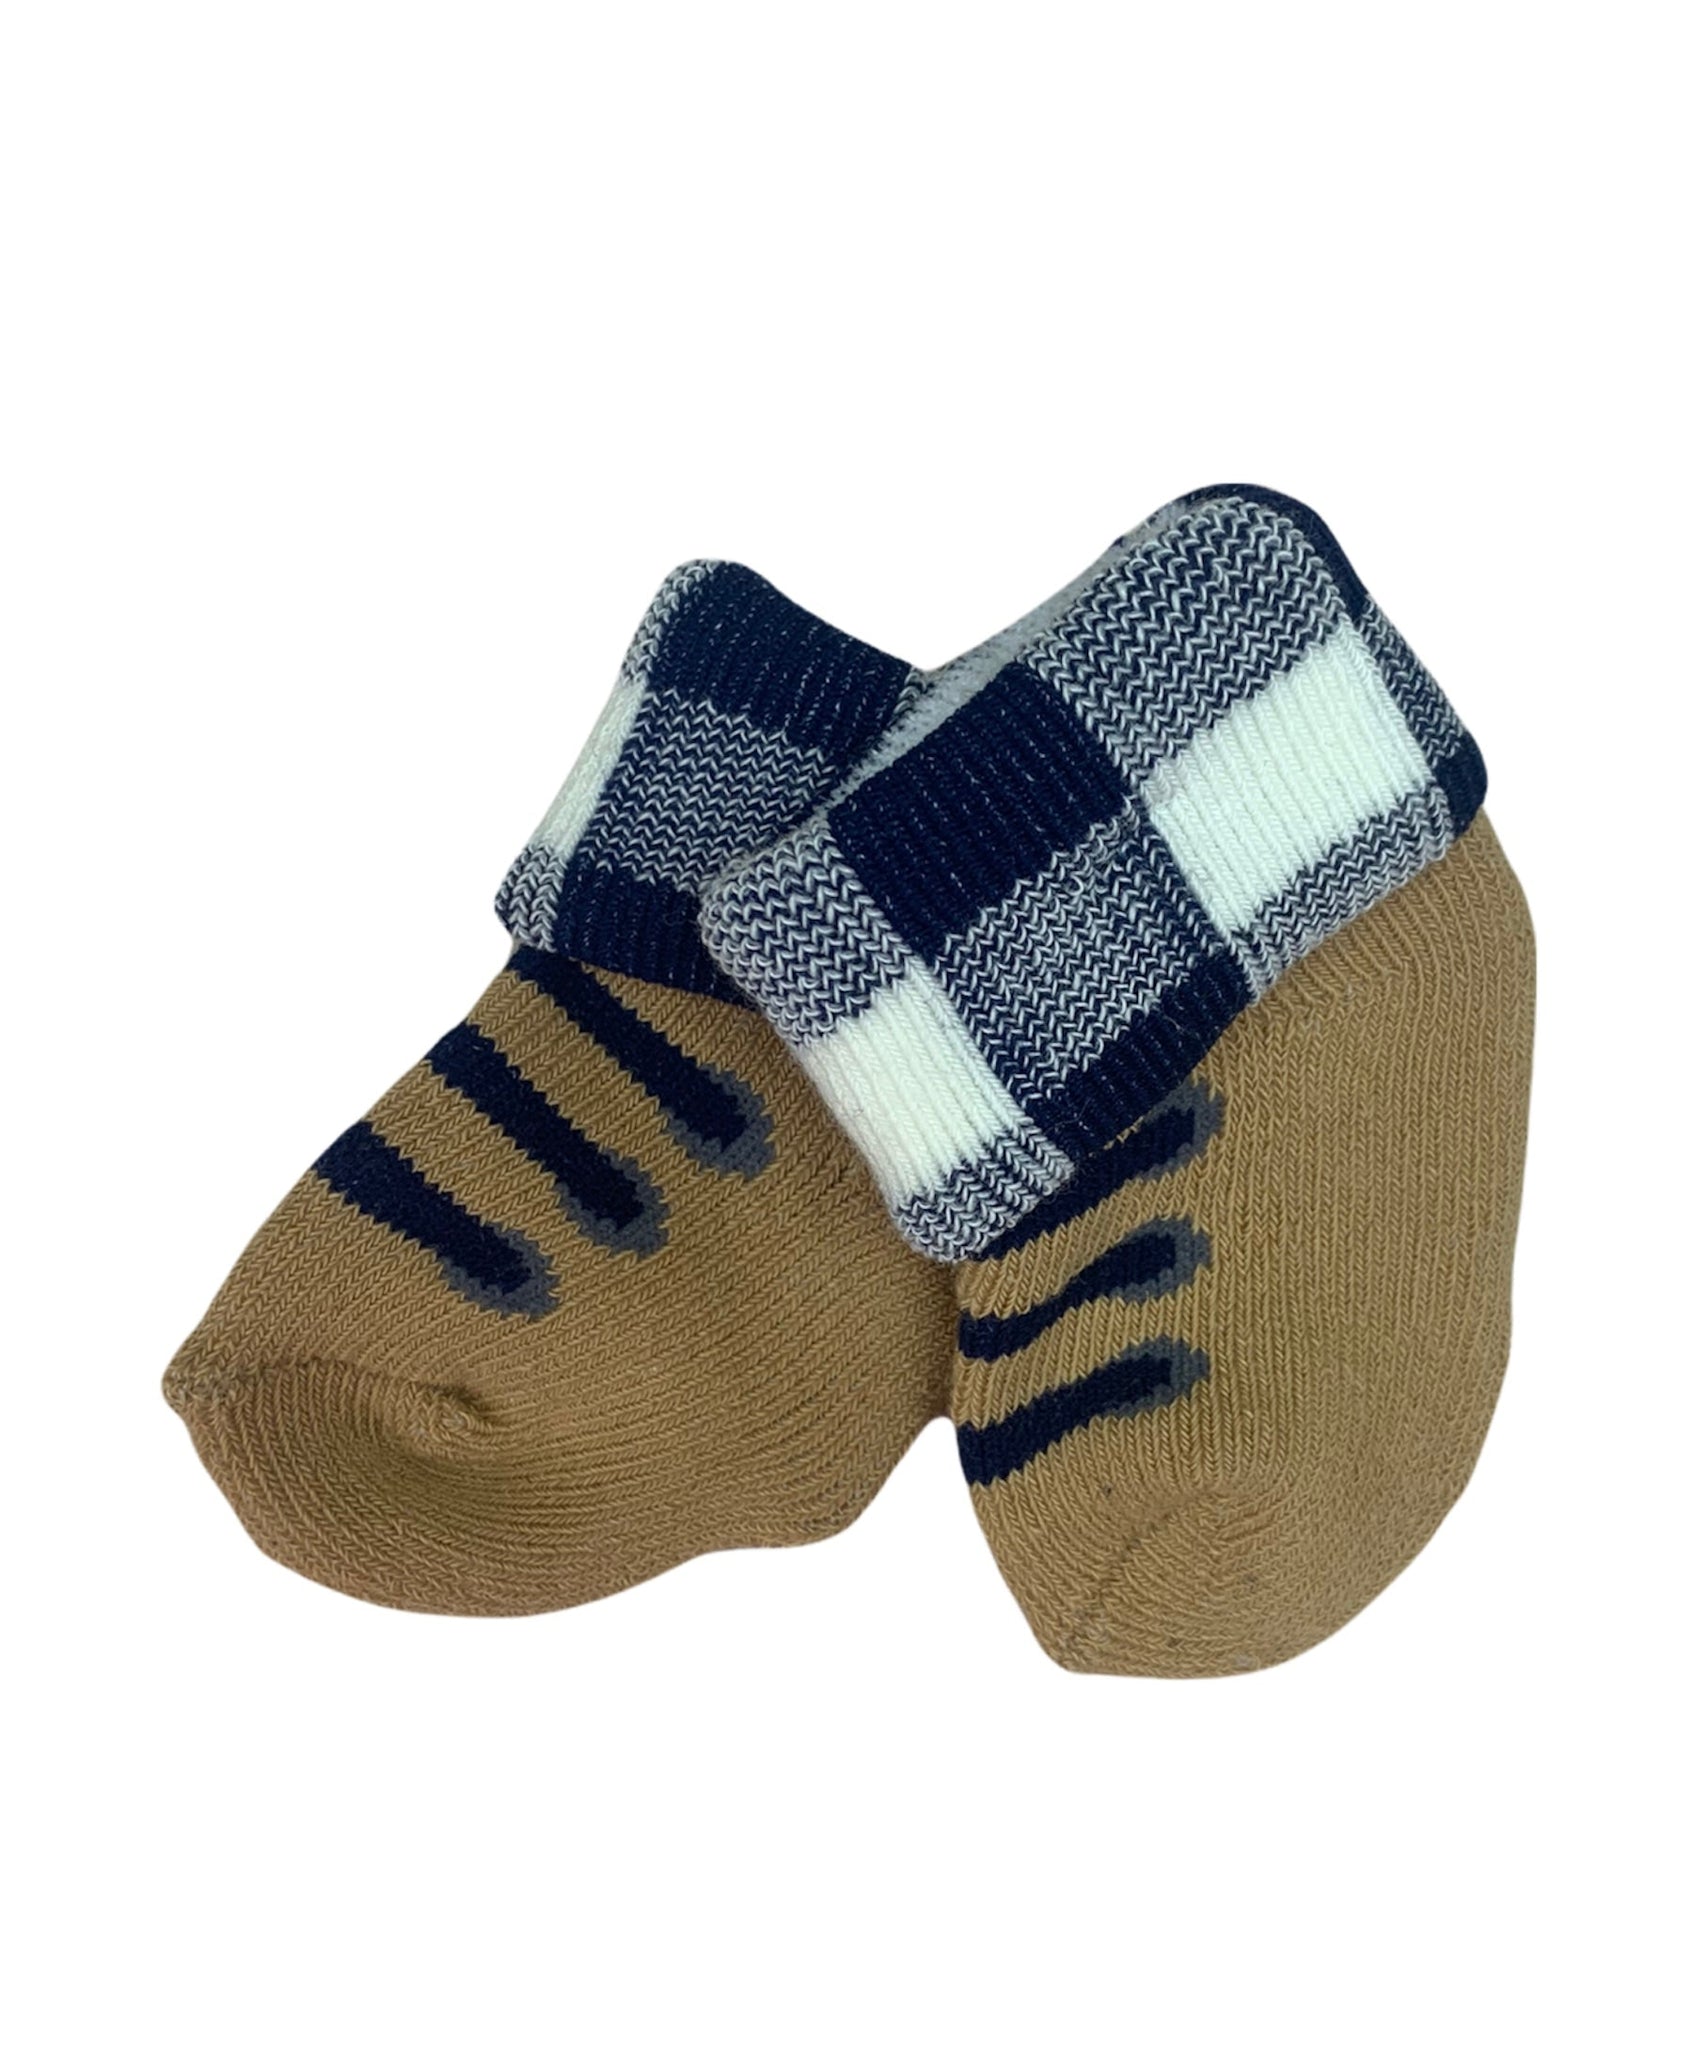 tan socks with navy lines to look like laces and navy and white checkered ankles